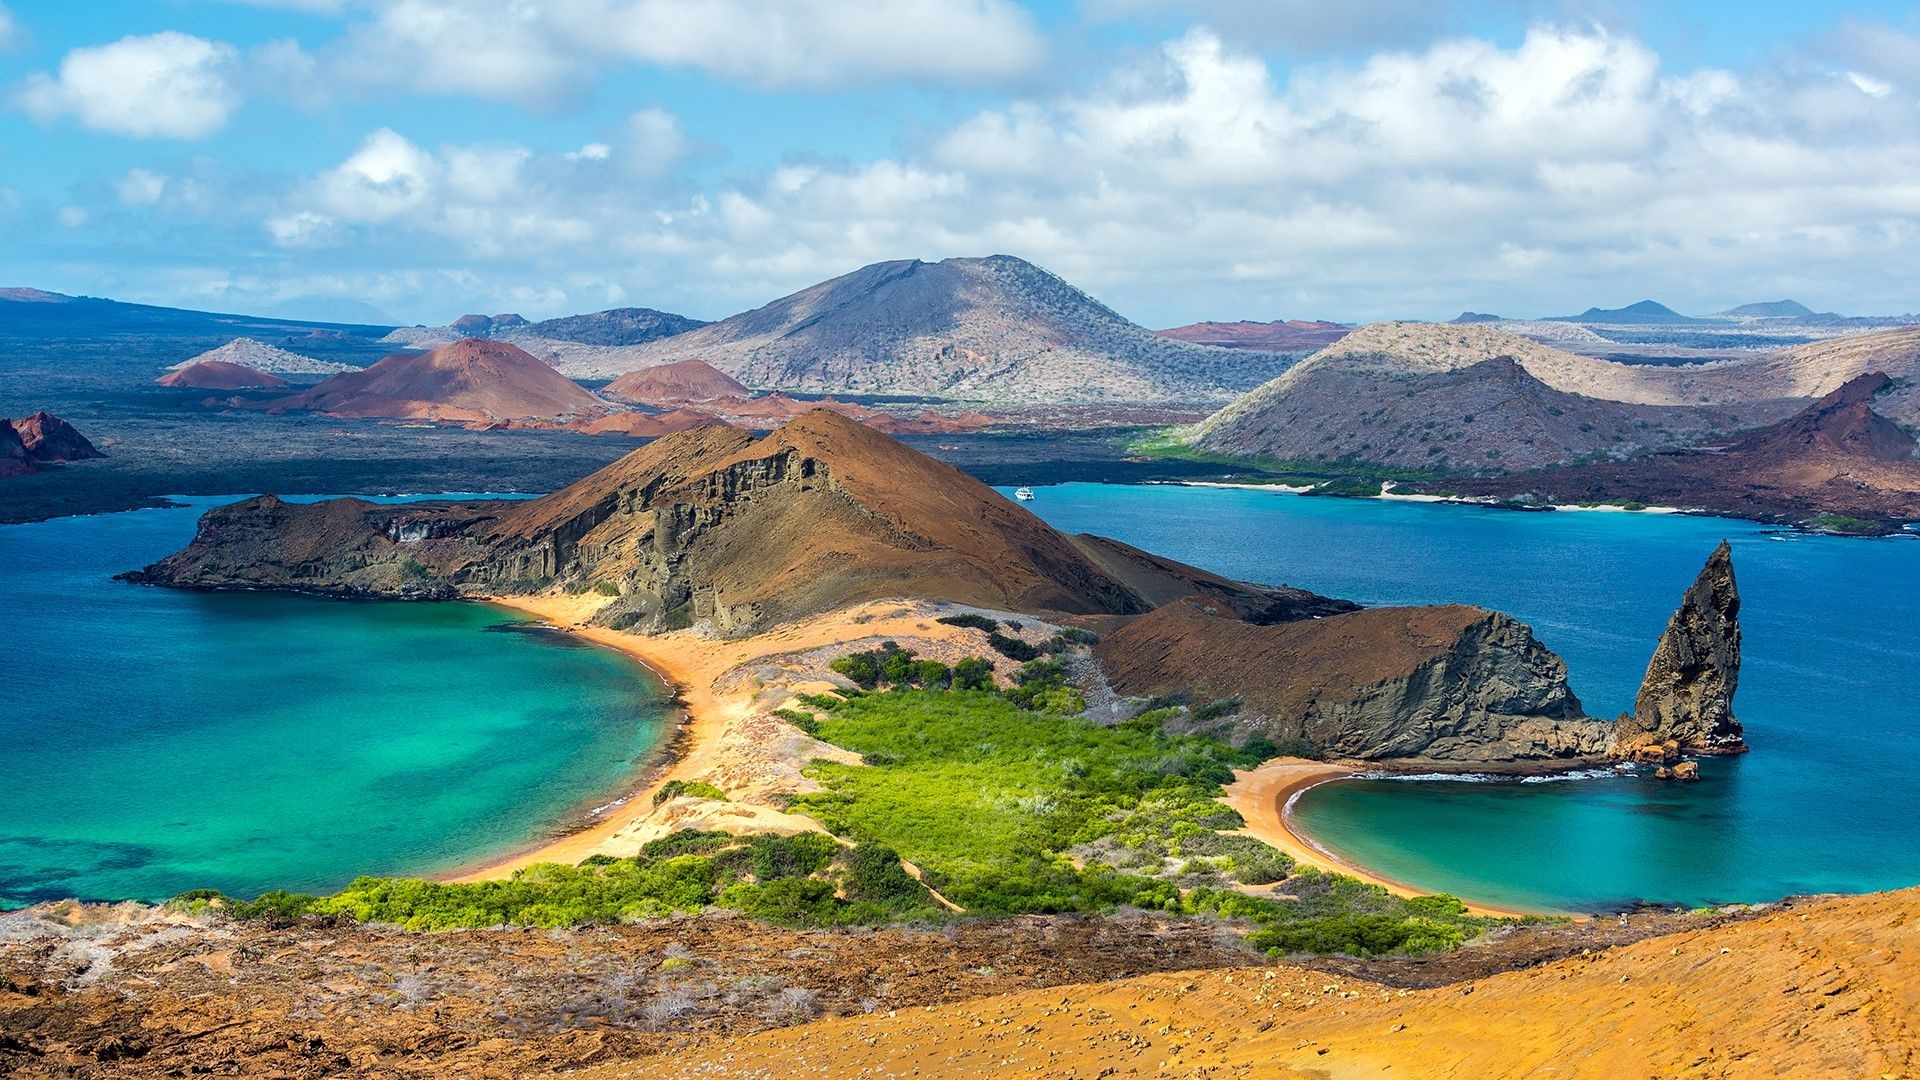 Ecuador: Bartolome Island, one of the "younger" islands in the Galapagos archipelago. 1920x1080 Full HD Wallpaper.